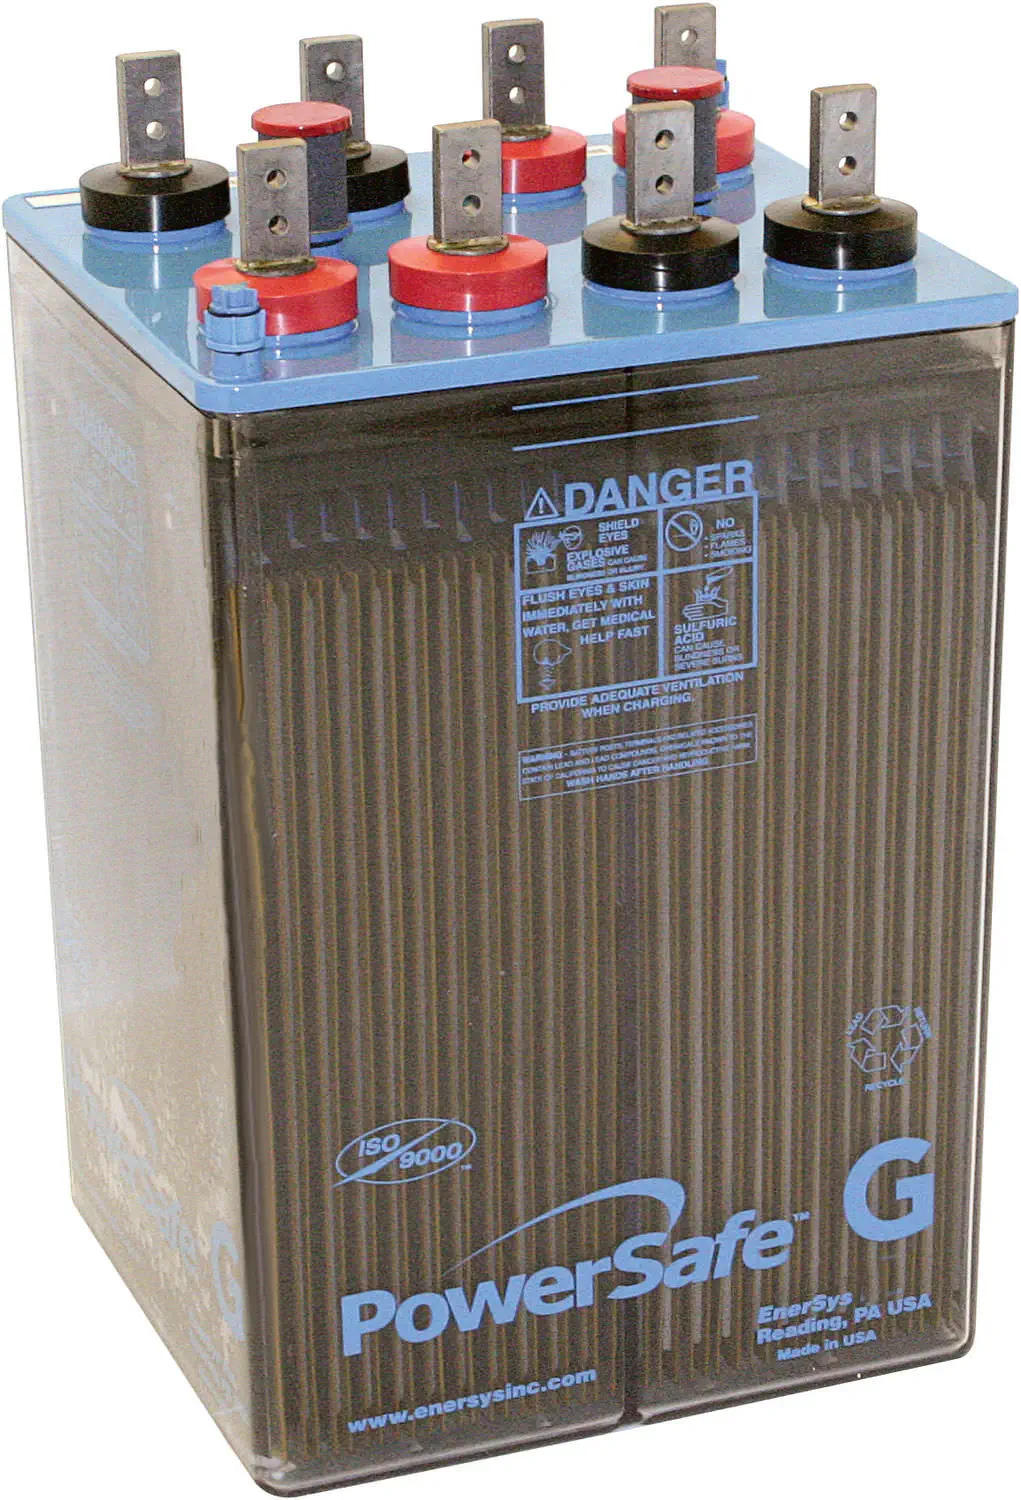 EnerSys PowerSafe GN-43